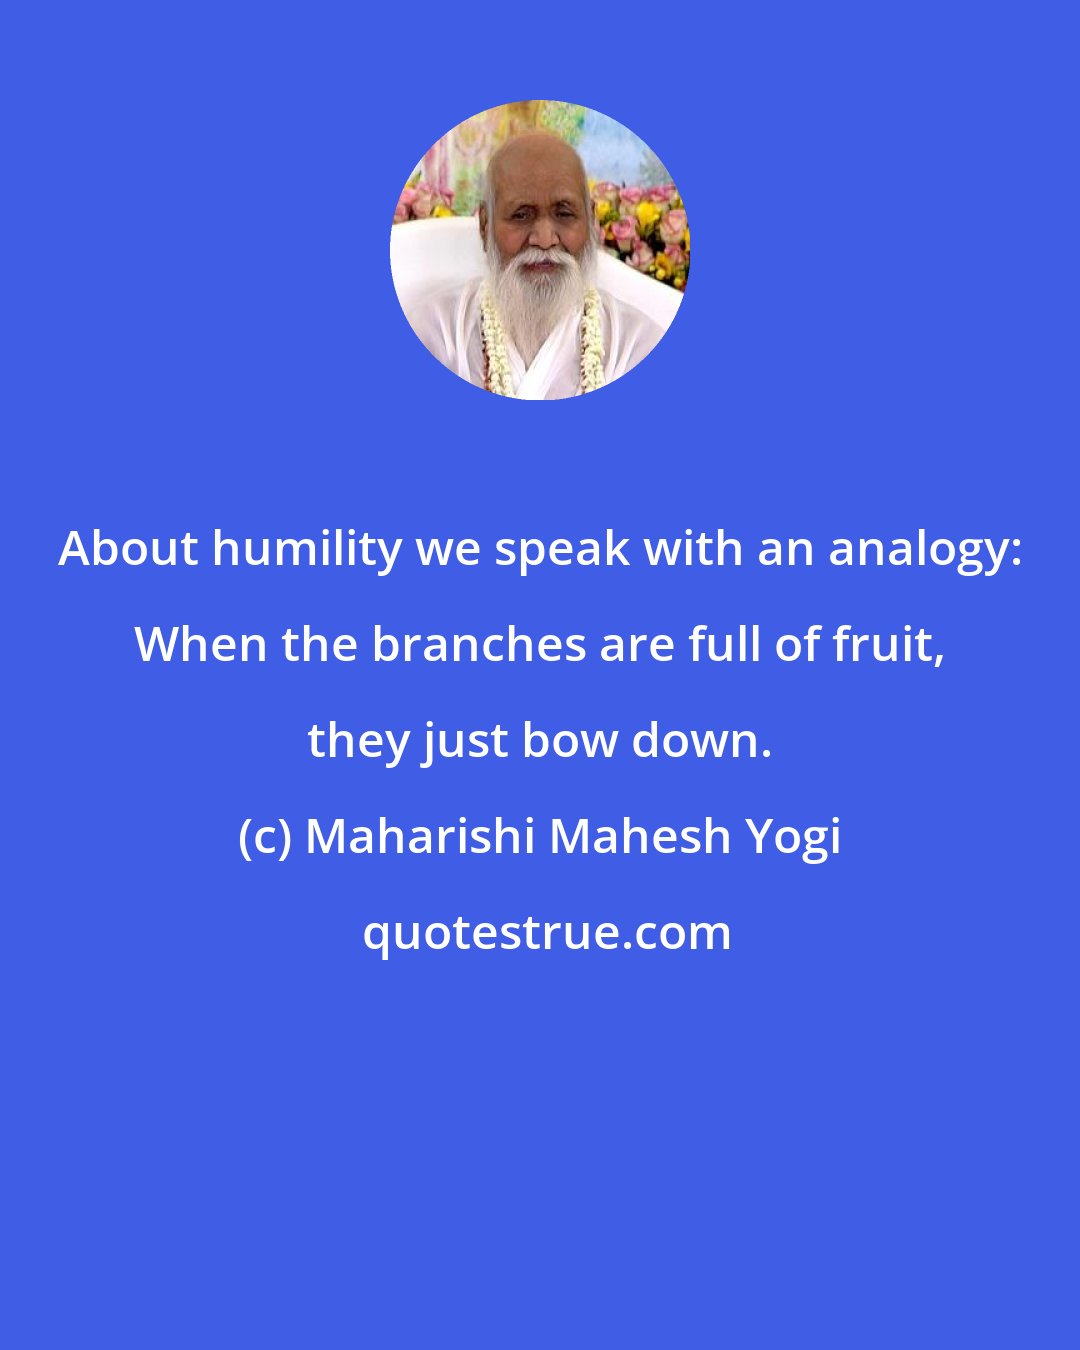 Maharishi Mahesh Yogi: About humility we speak with an analogy: When the branches are full of fruit, they just bow down.